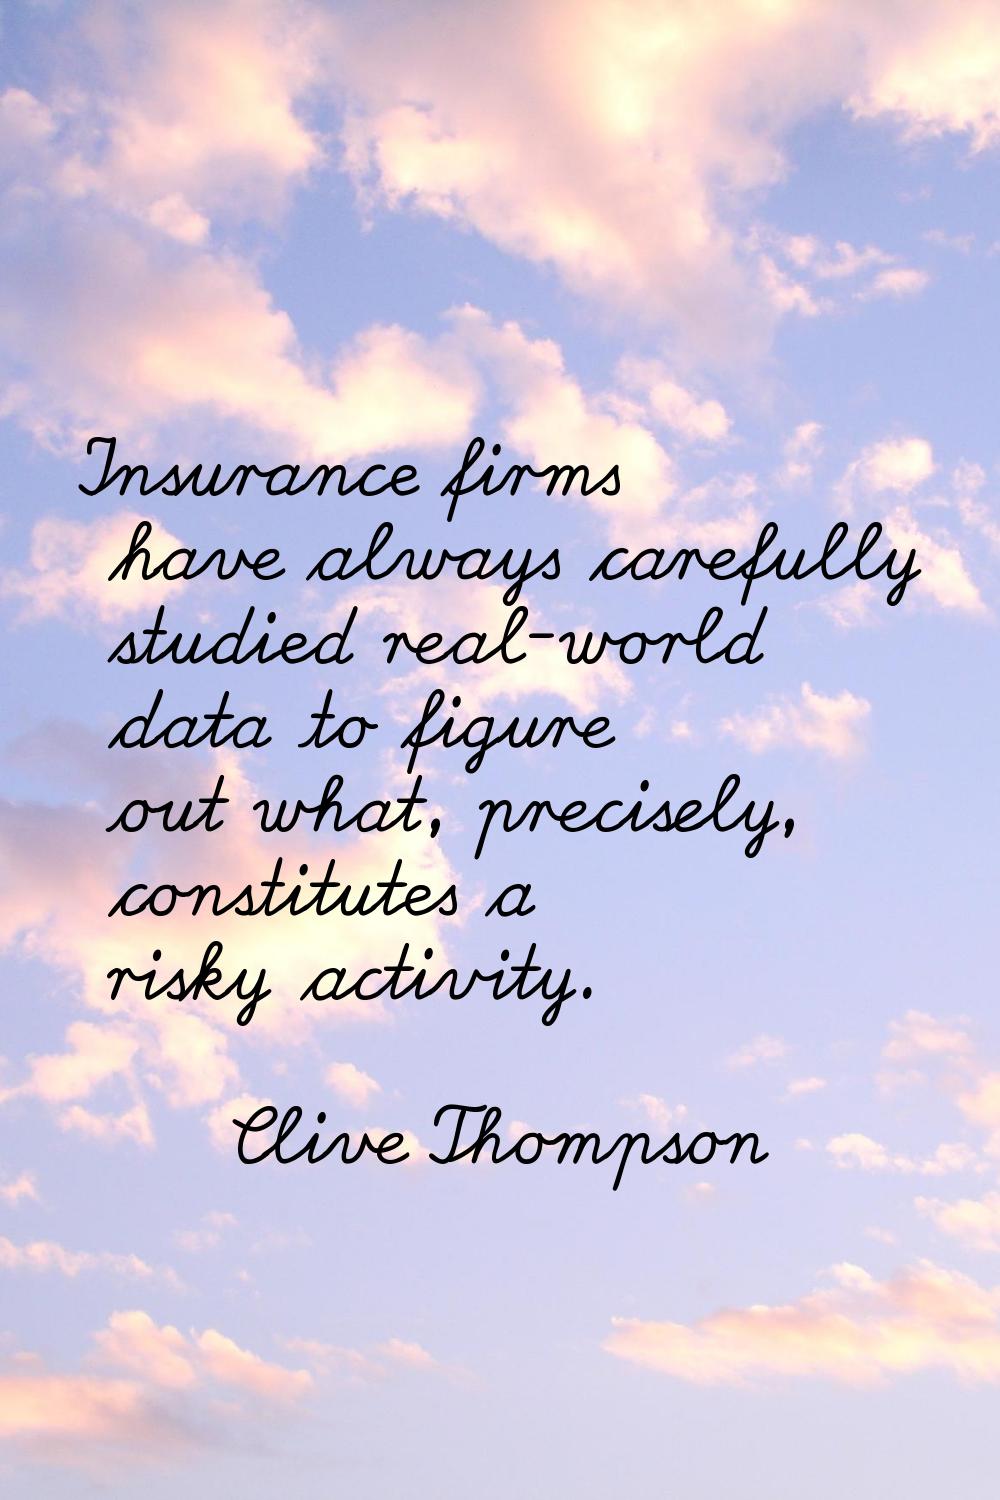 Insurance firms have always carefully studied real-world data to figure out what, precisely, consti